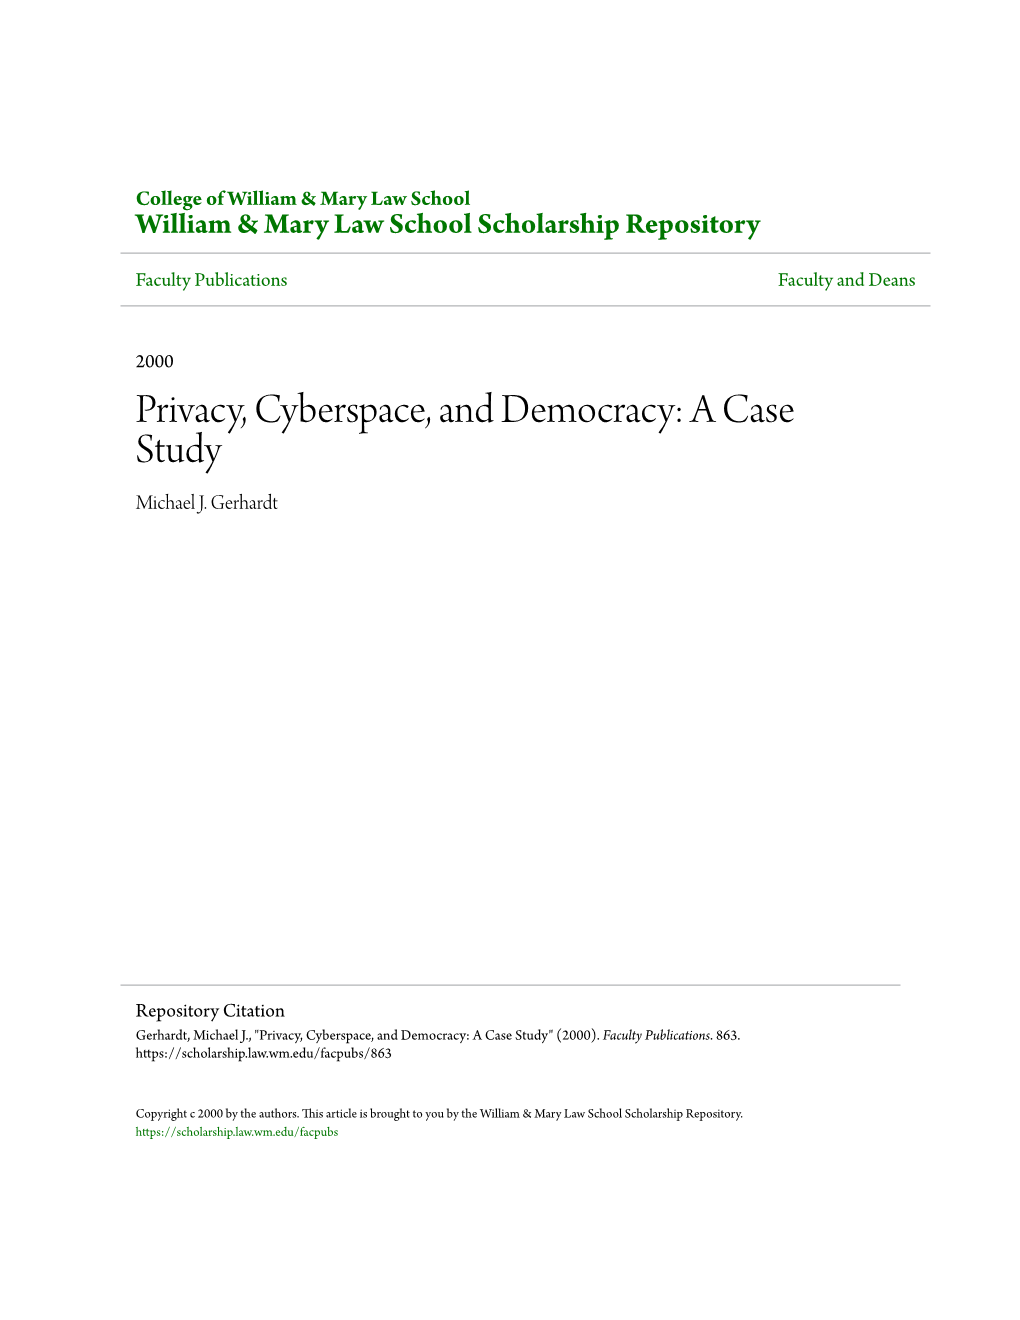 Privacy, Cyberspace, and Democracy: a Case Study Michael J